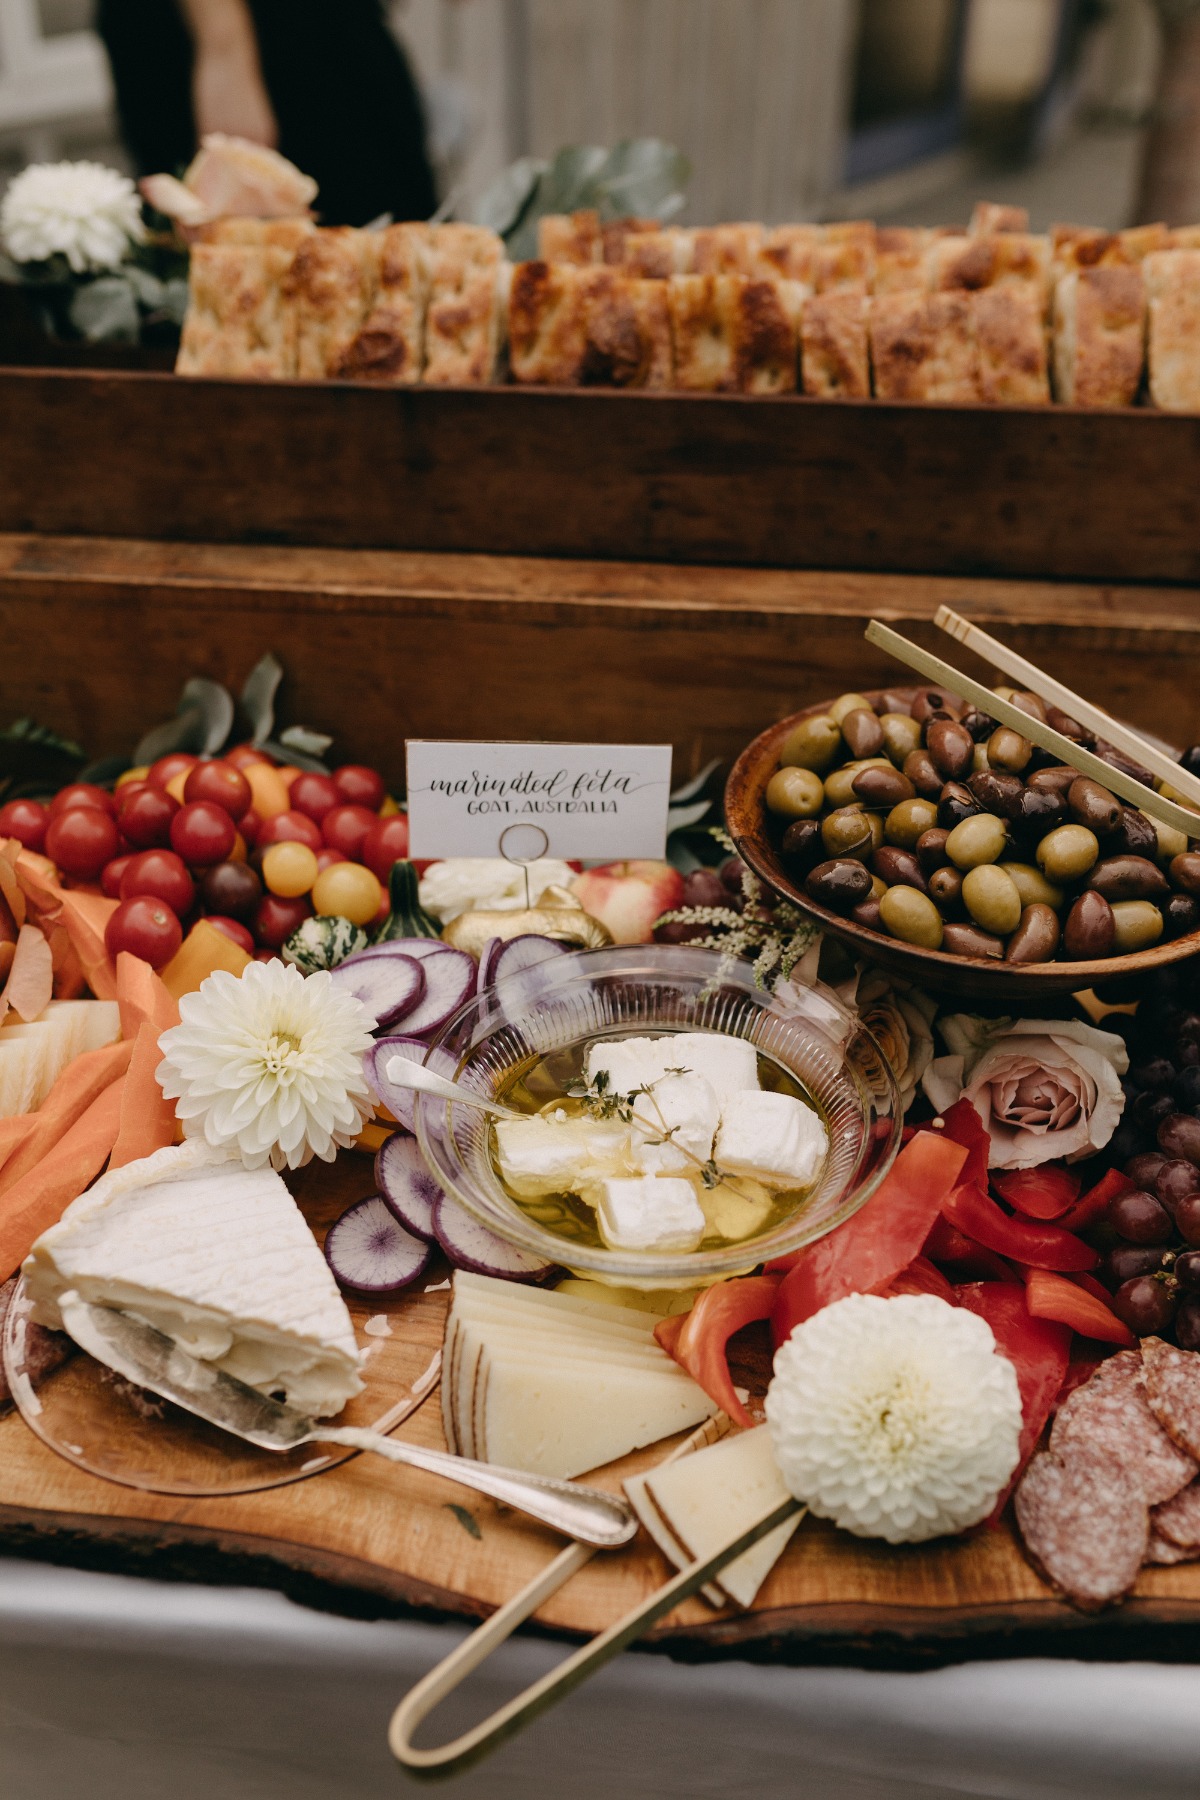 The True Meaning of Maine: Coasts, Barns, and Bohemian Inspo Stun at this Autumn Wedding